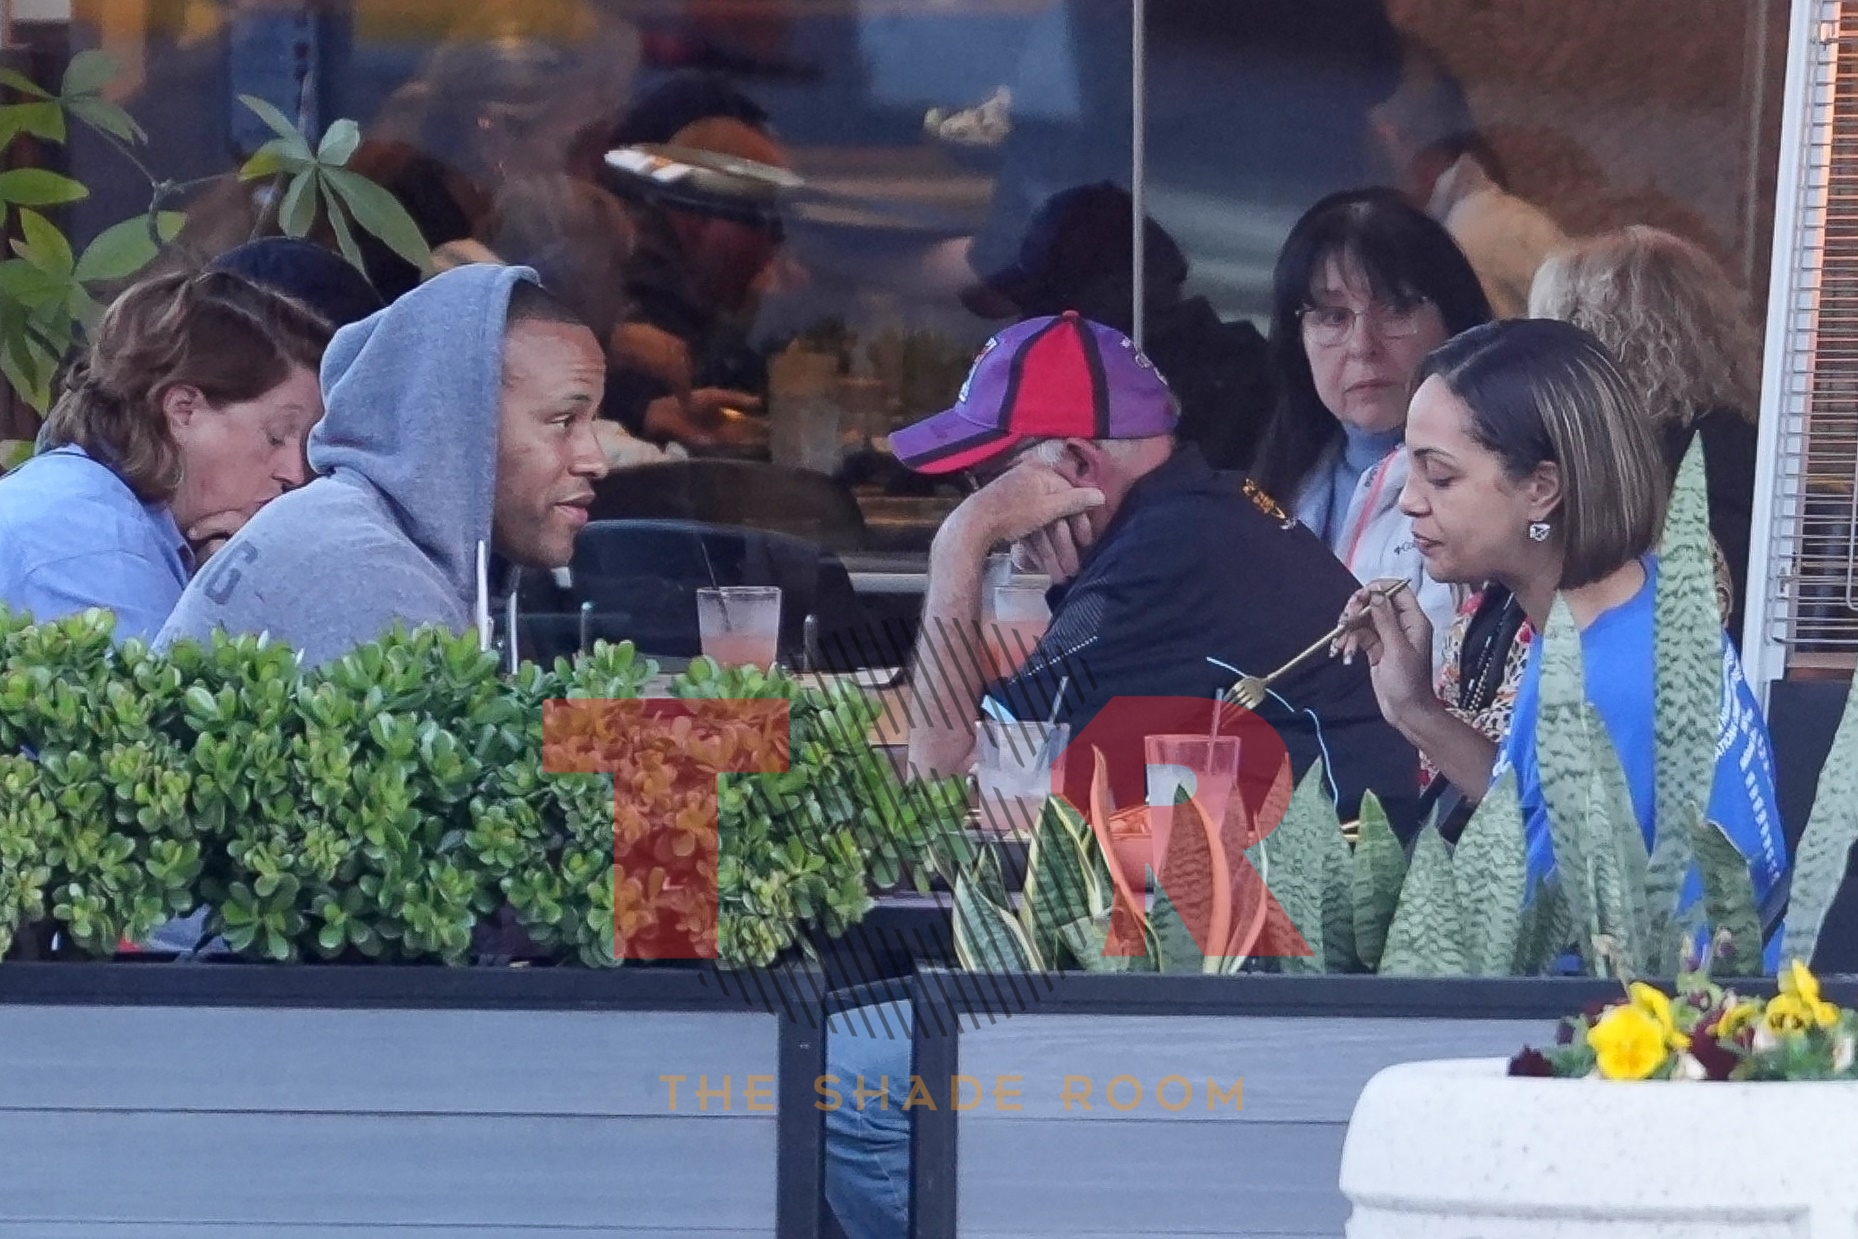 Bae Watch! Meagan Good’s Ex-Husband DeVon Franklin Is Spotted On A Date With A Mystery Woman (EXCLUSIVE PHOTOS) thumbnail